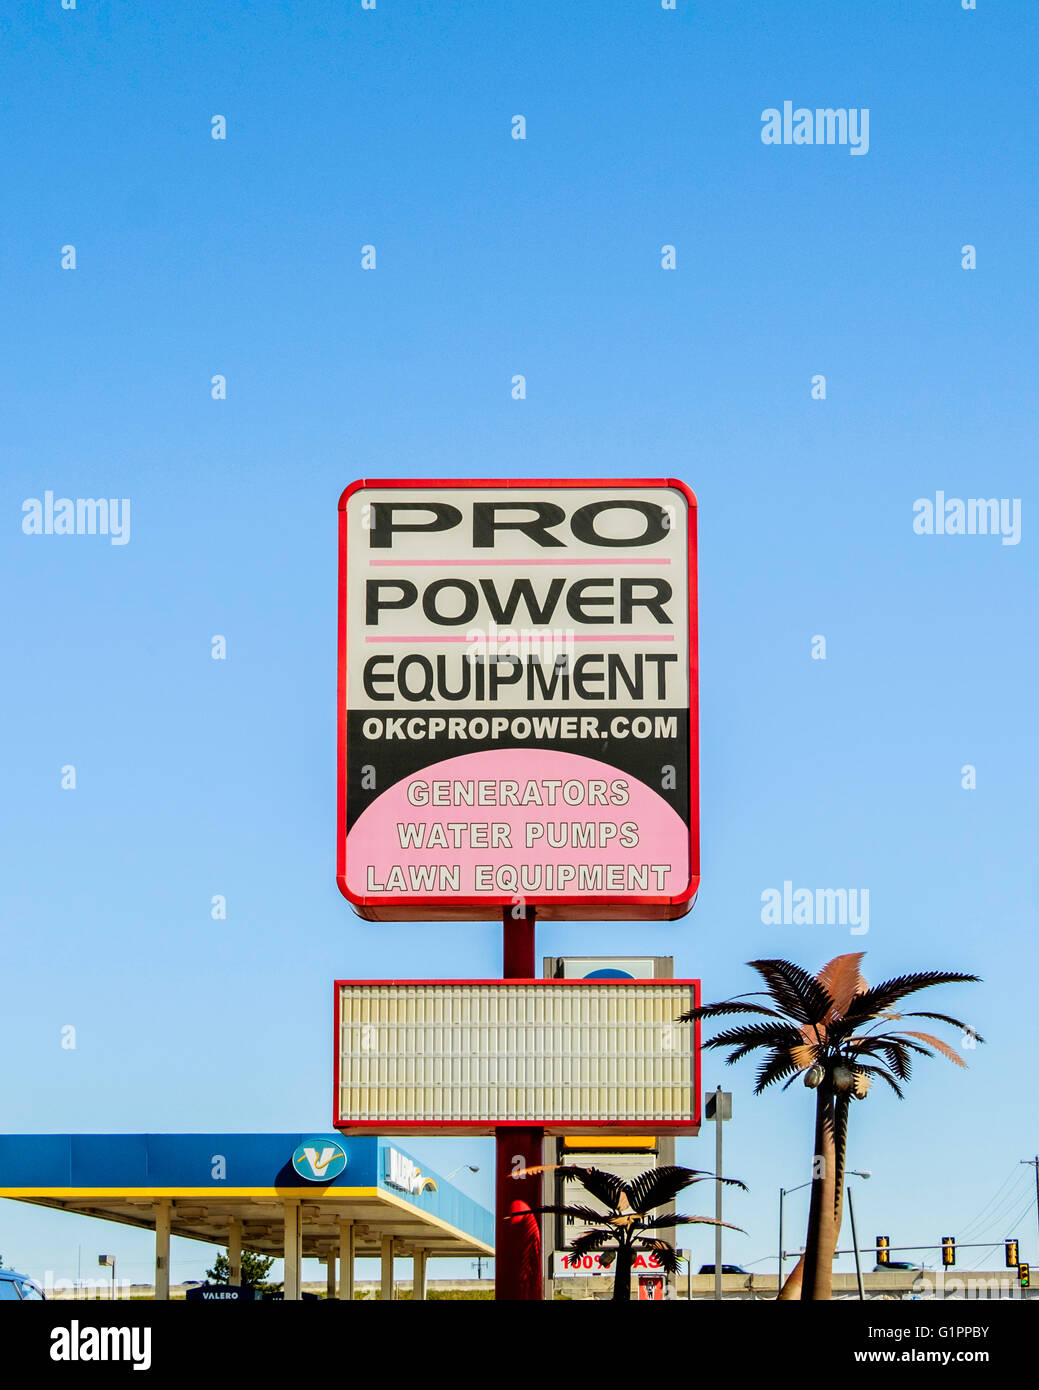 A pole sign advertising Professional Power Equipment business in Oklahoma City, Oklahoma, USA. Stock Photo